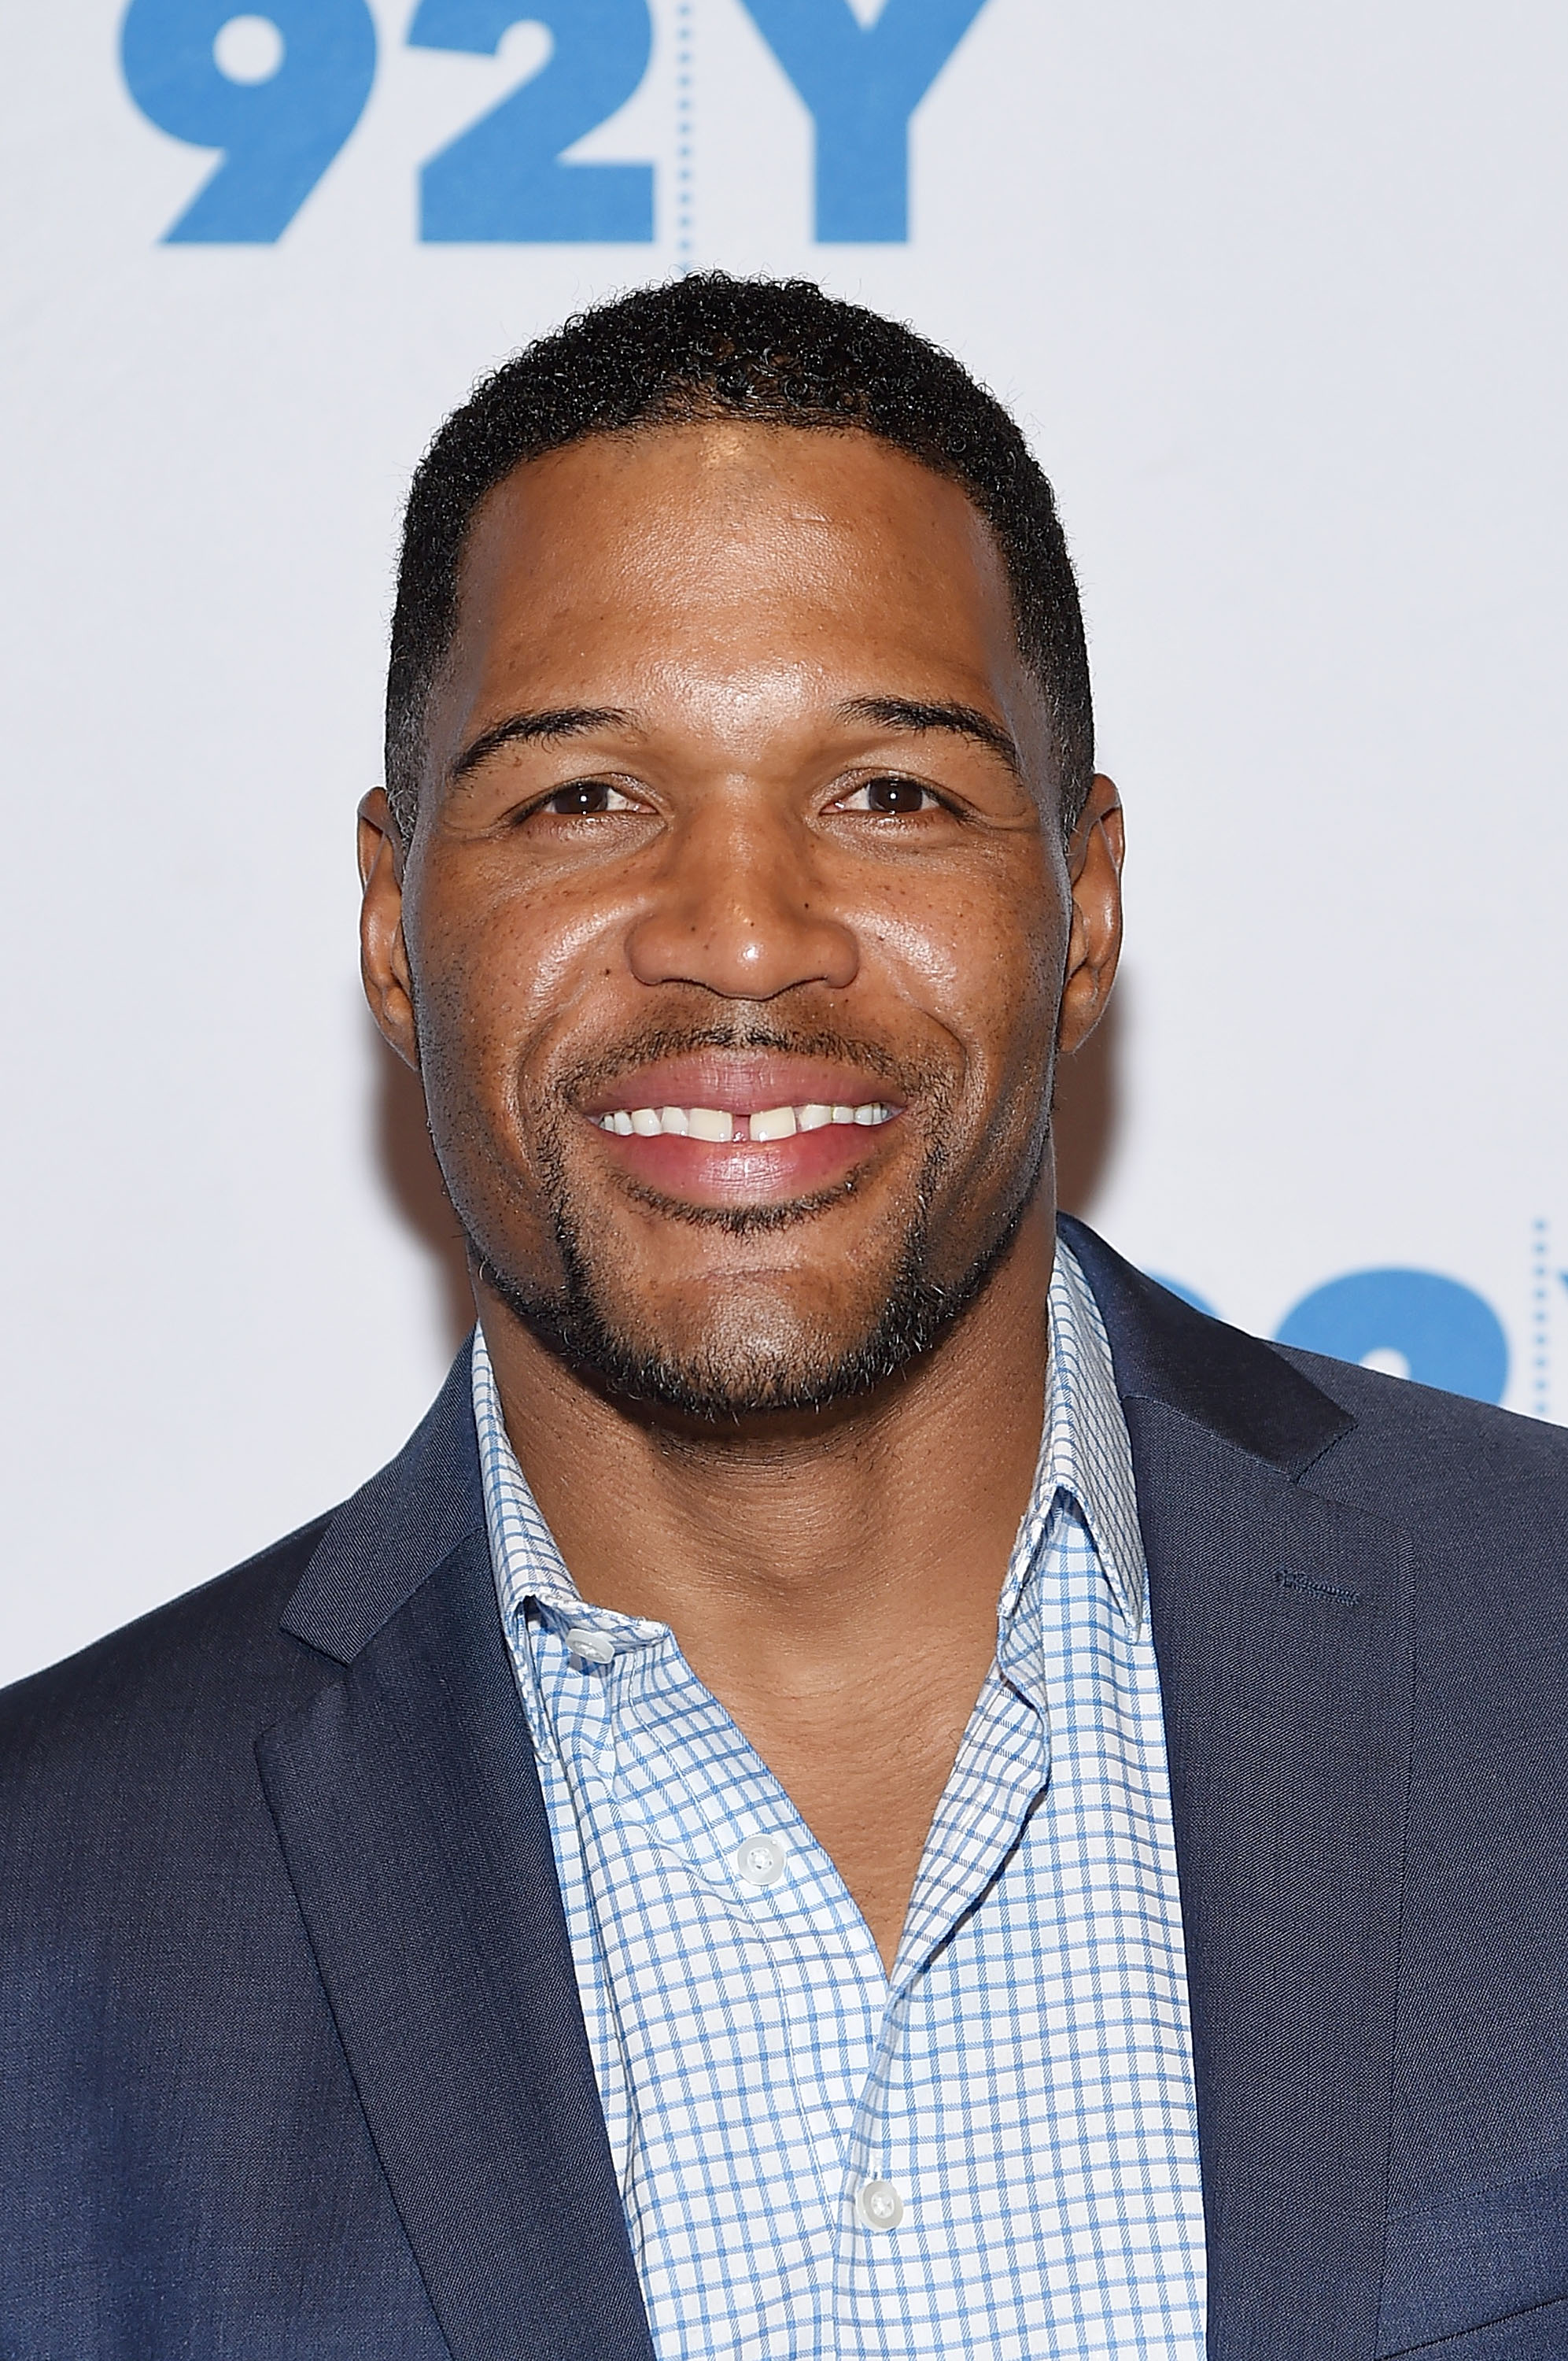 Michael Strahan poses at 92nd Street Y on May 23, 2017 in New York City | Source: Getty Images